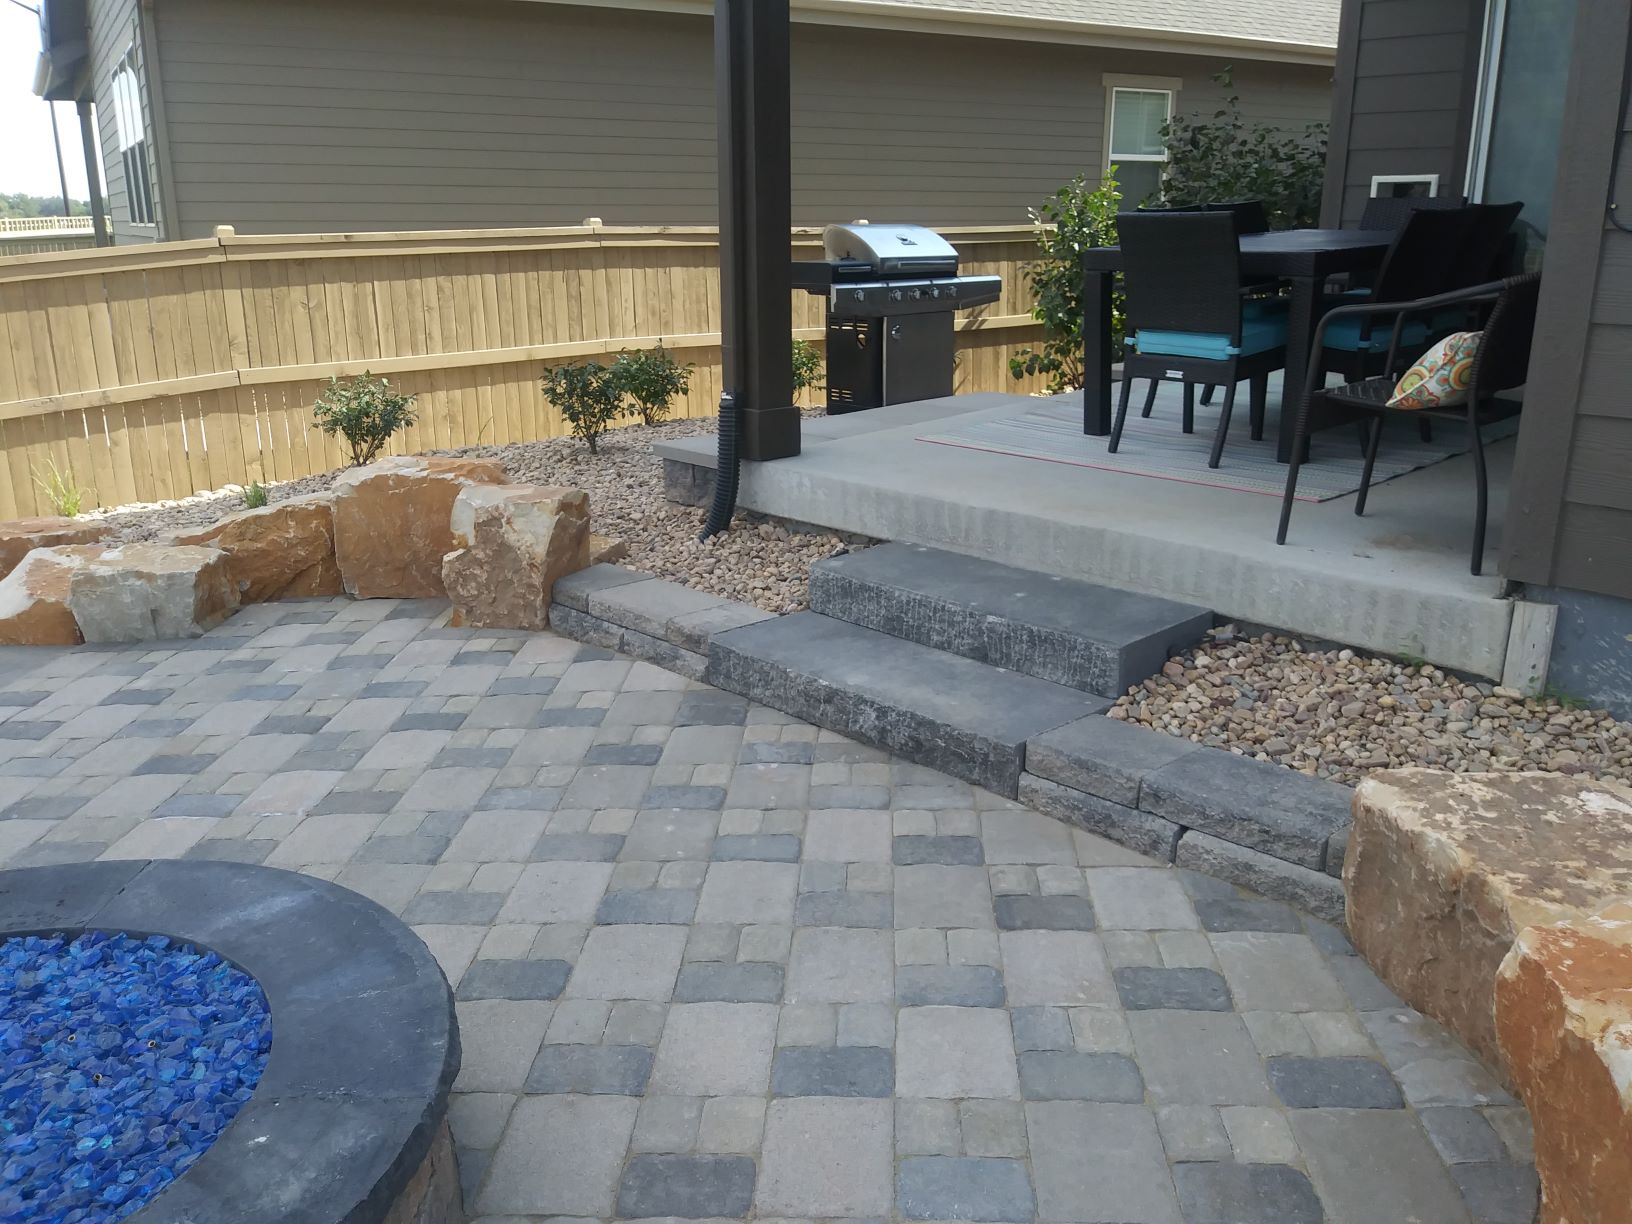 Brick laid patio with flat stone steps and rocks with boulders on the edge.